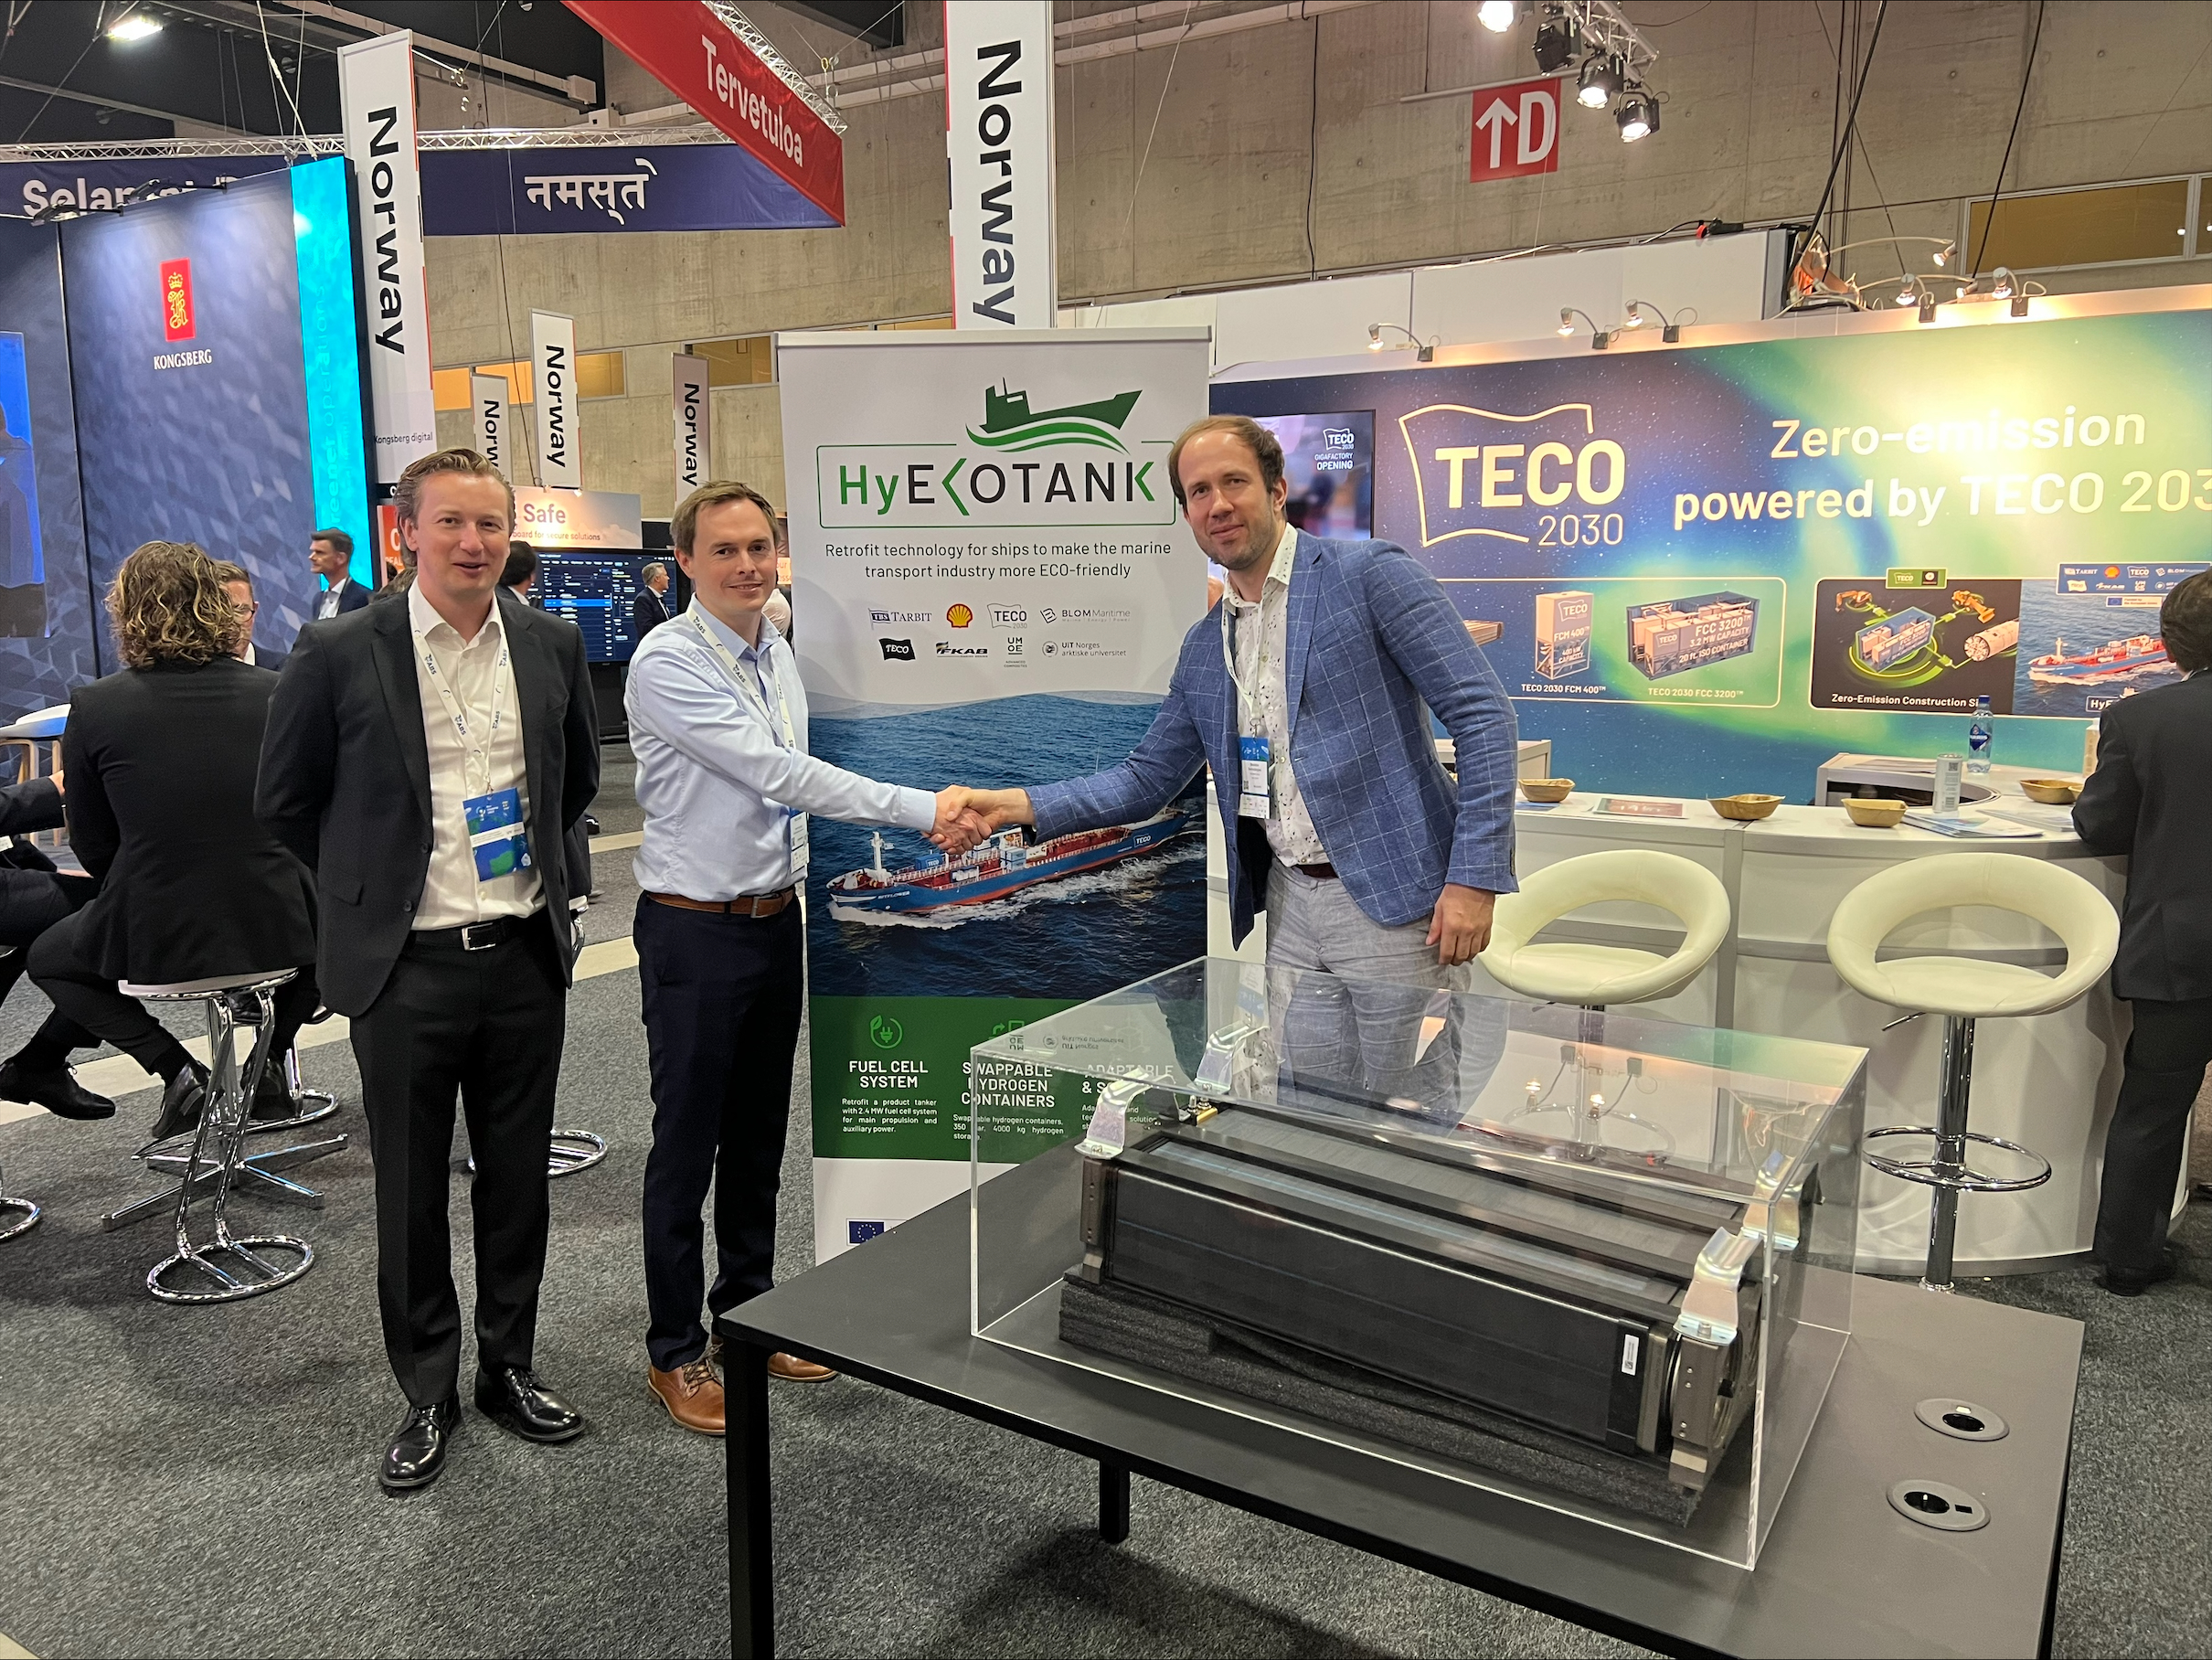 TECO 2030 Booth at Nor-Shipping 2023: TECO 2030 and Skeleton Technologies enter into a strategic partnership to boost renewable hydrogen as a zero-carbon fuel for the maritime sector. From left, TECO 2030 COO Tor-Erik Hoftun and Director of Business Development Fredrik Aarskog, together with Sales Director Kersten Eero from Skeleton Technologies on the right.